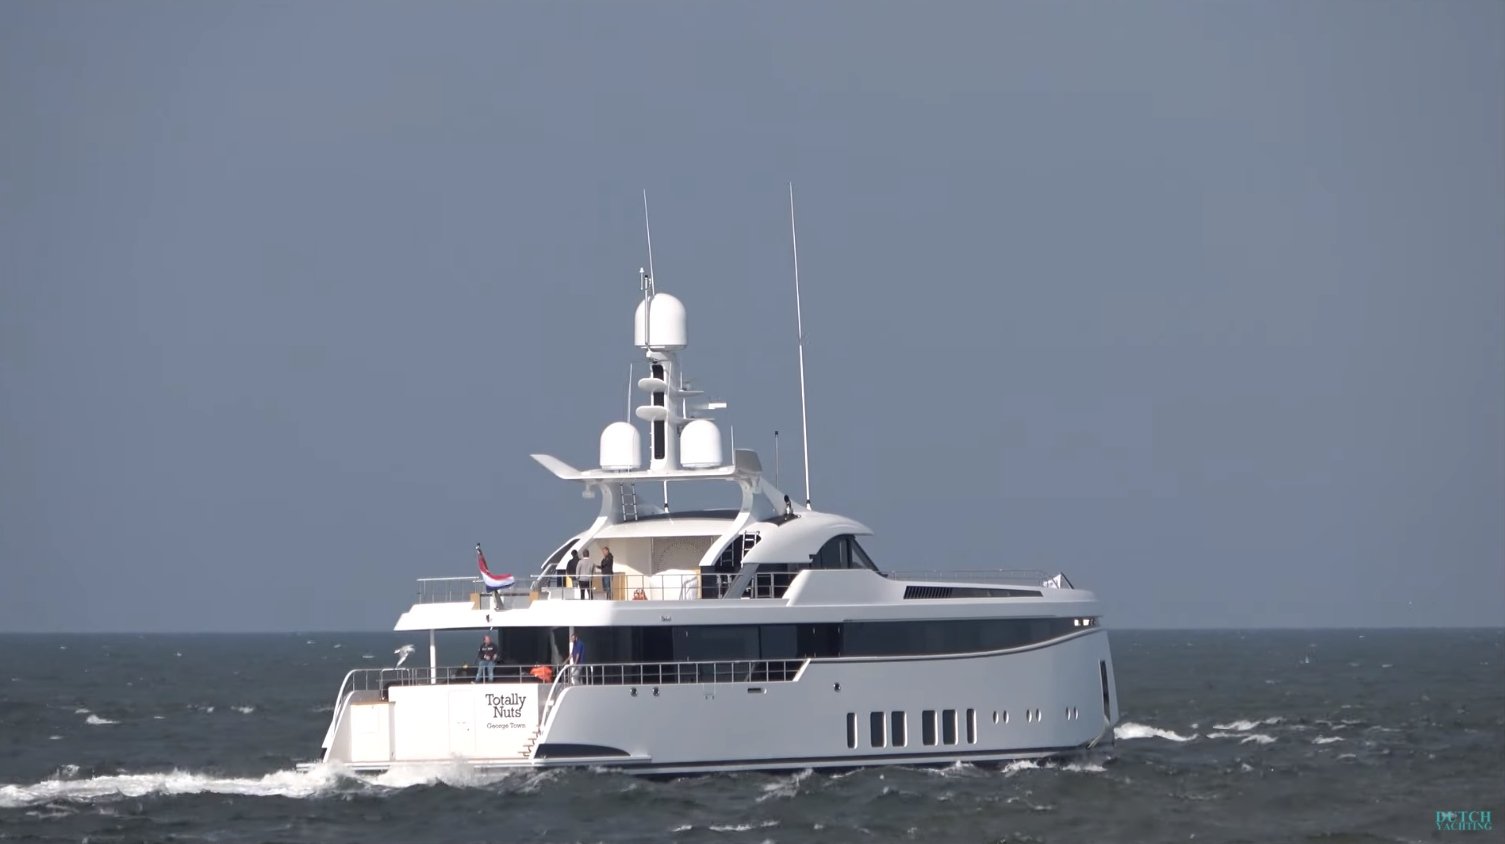 TOTALLY NUTS yacht • Feadship • 2020 • owner Sarkis Izmirlian